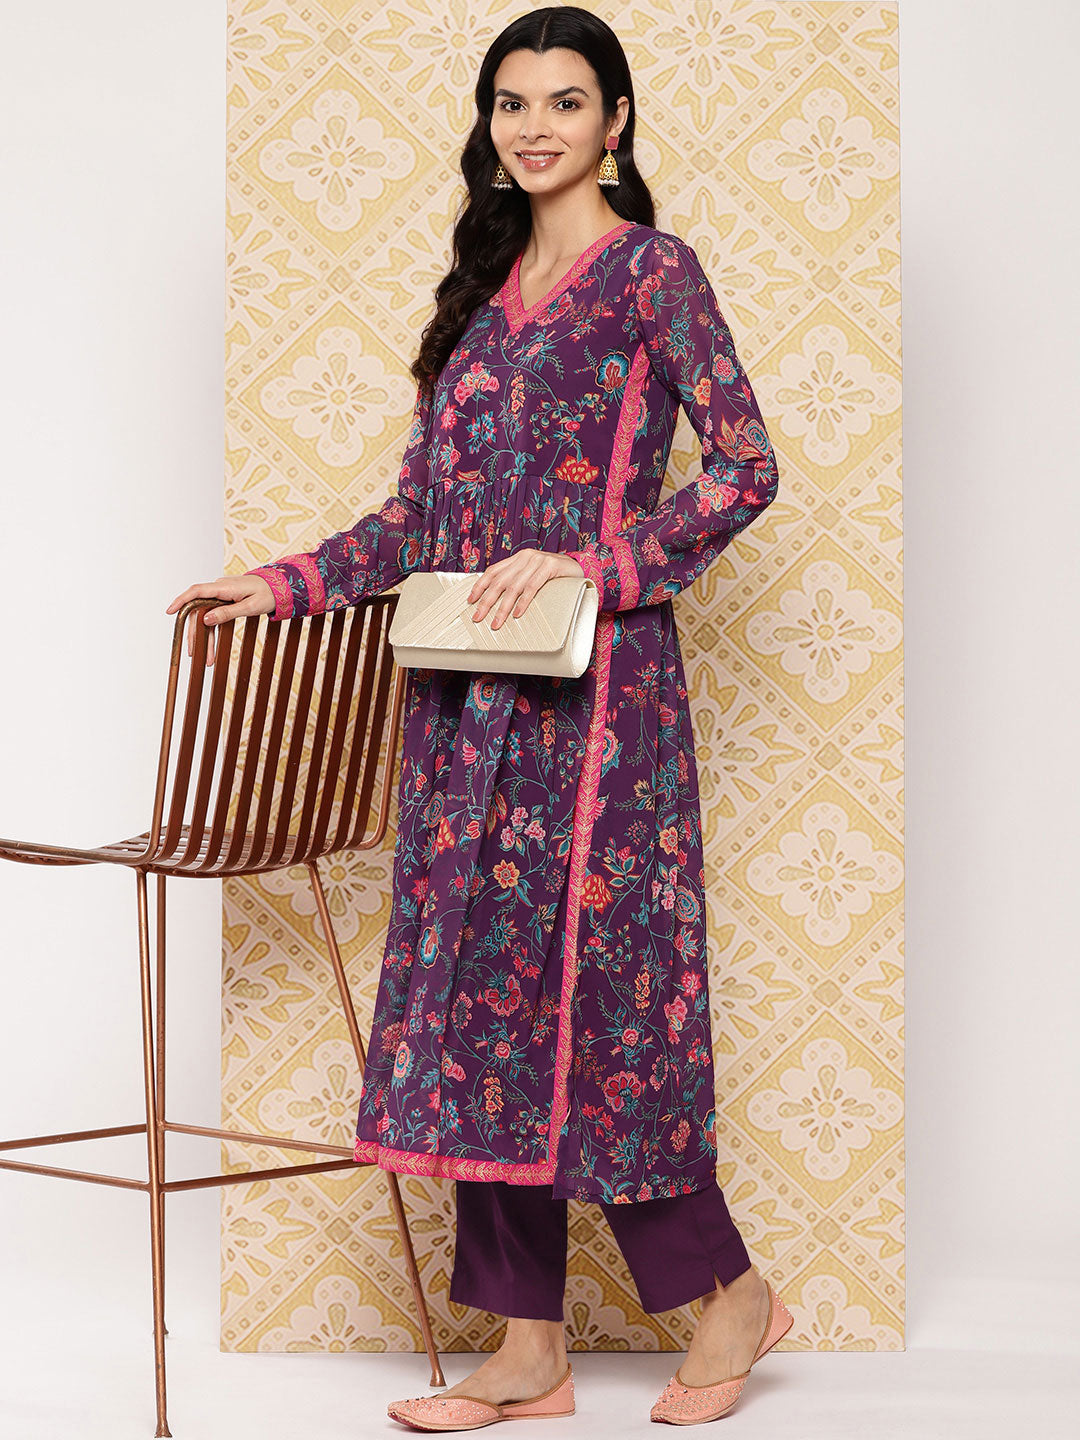 Purple Floral Printed Layered Kurta with Trousers